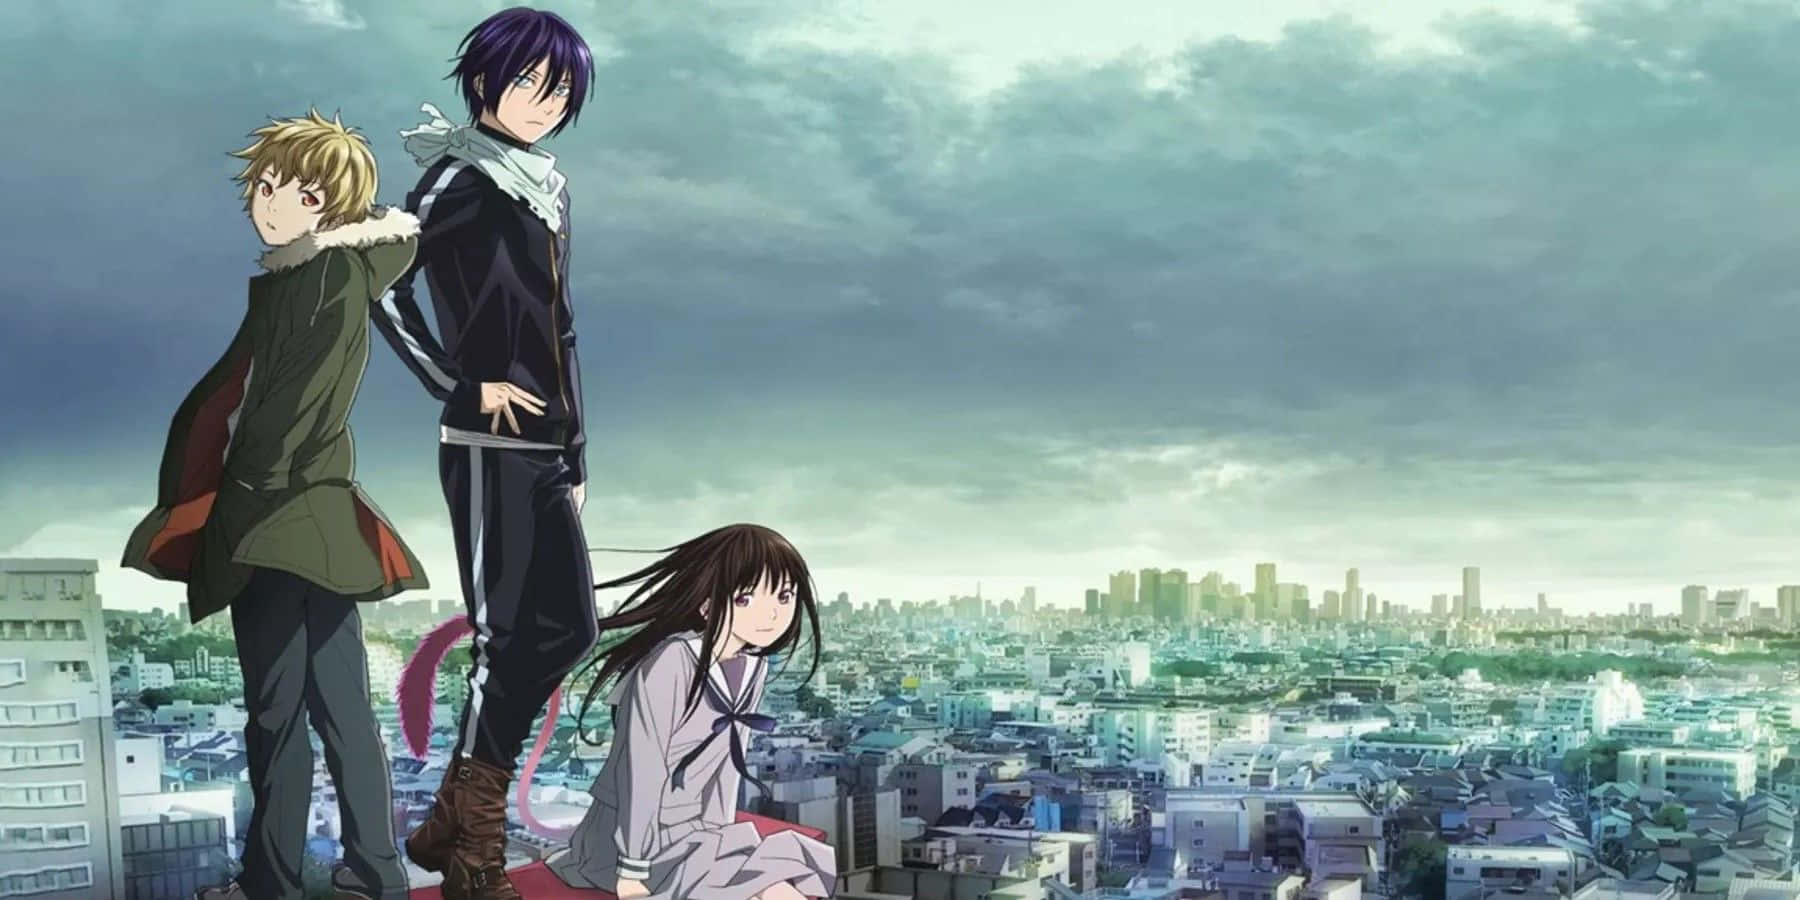 Noragami: On a Journey to Impending Fate